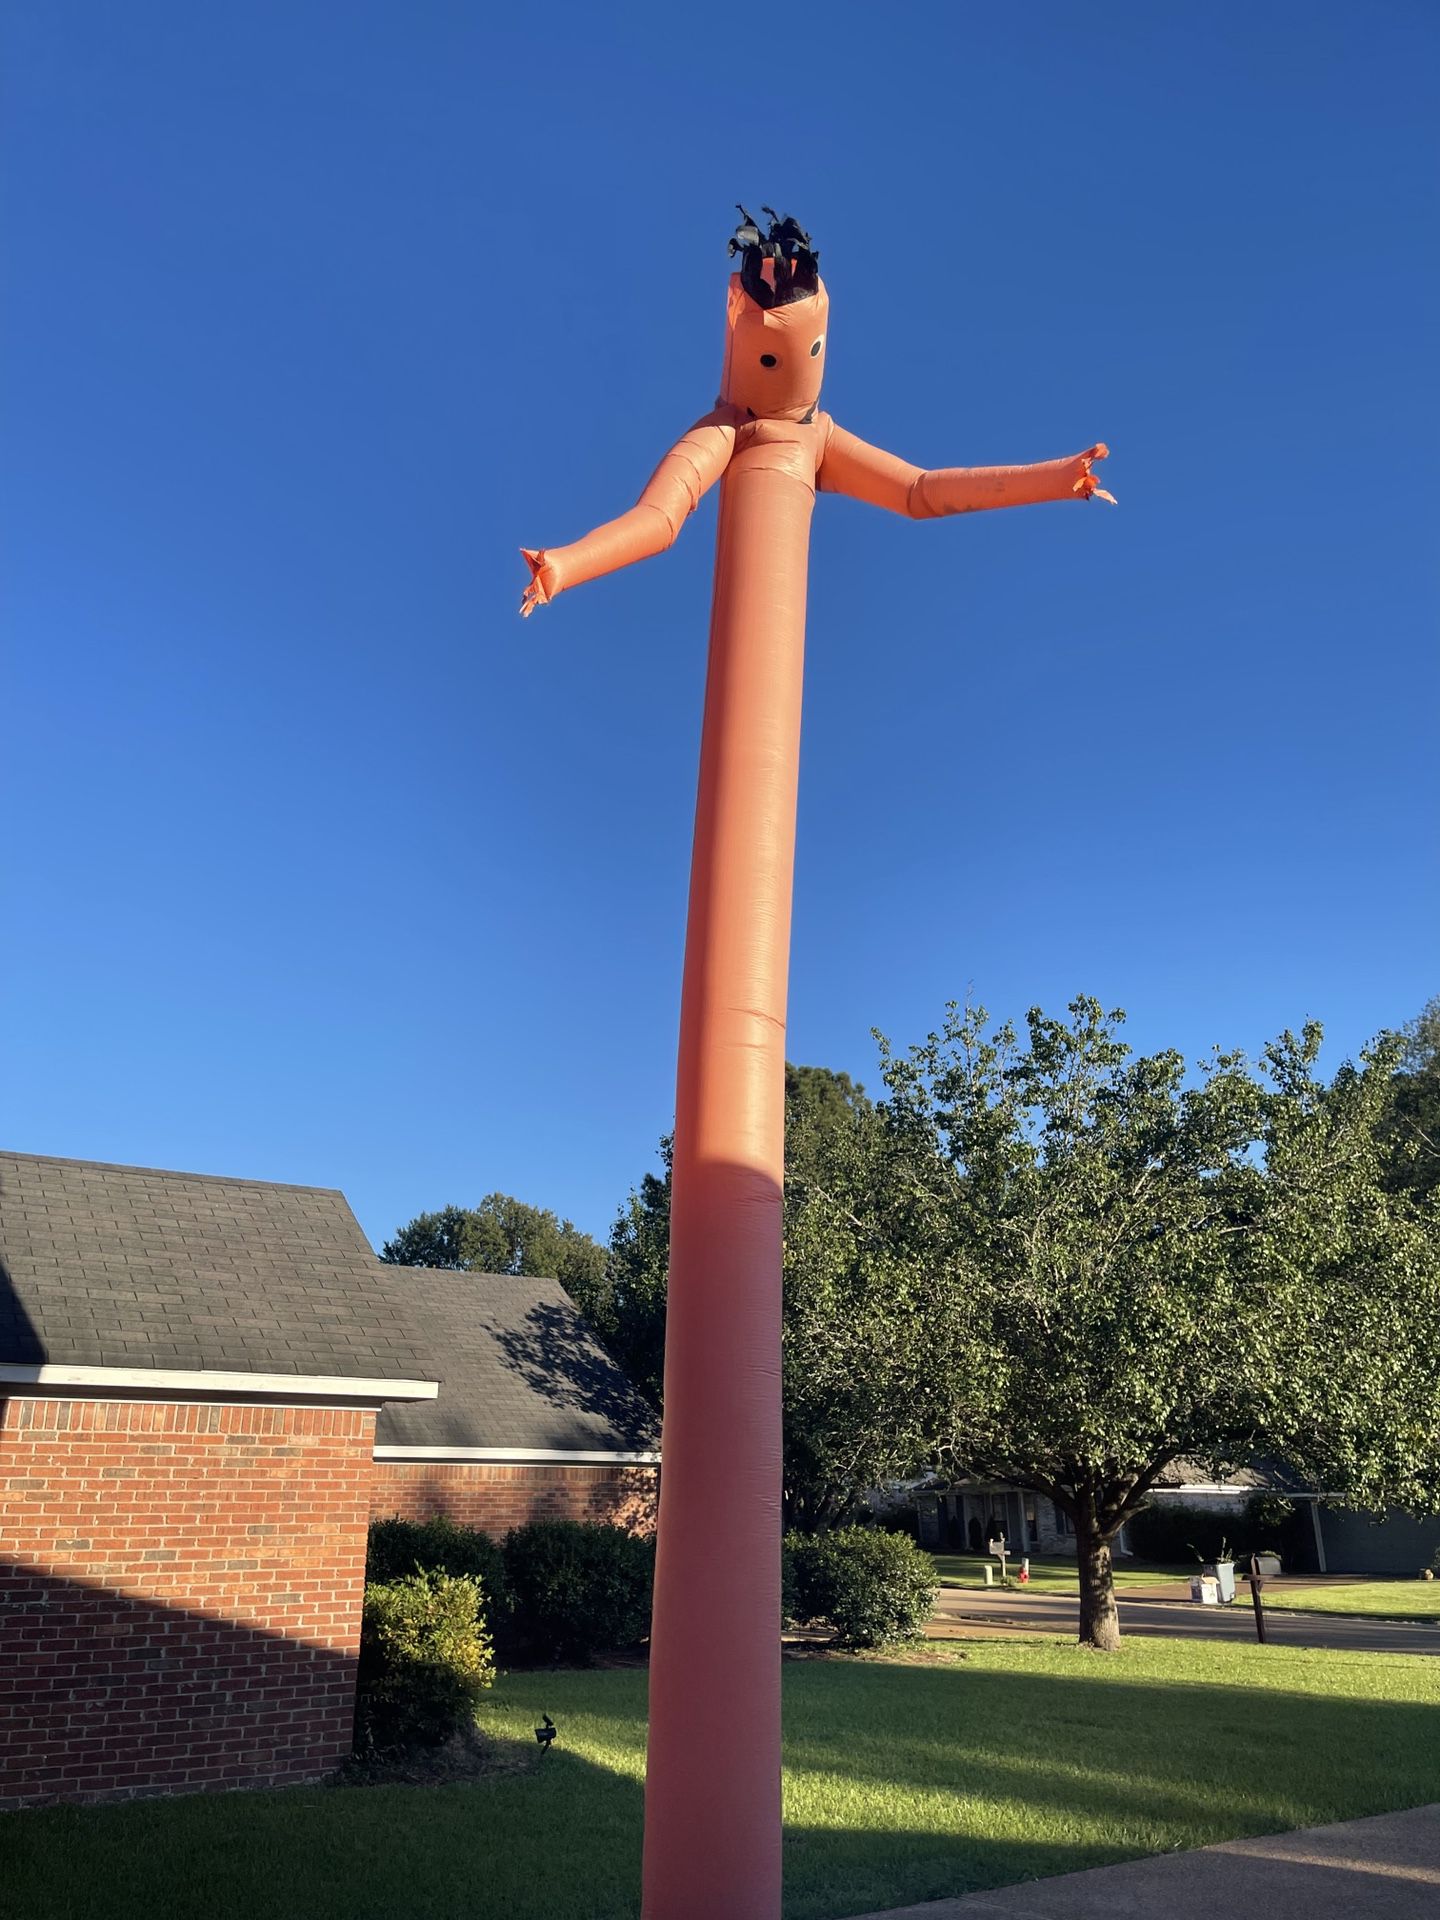 20 ft. INFLATABLE TUBE MAN!!! 